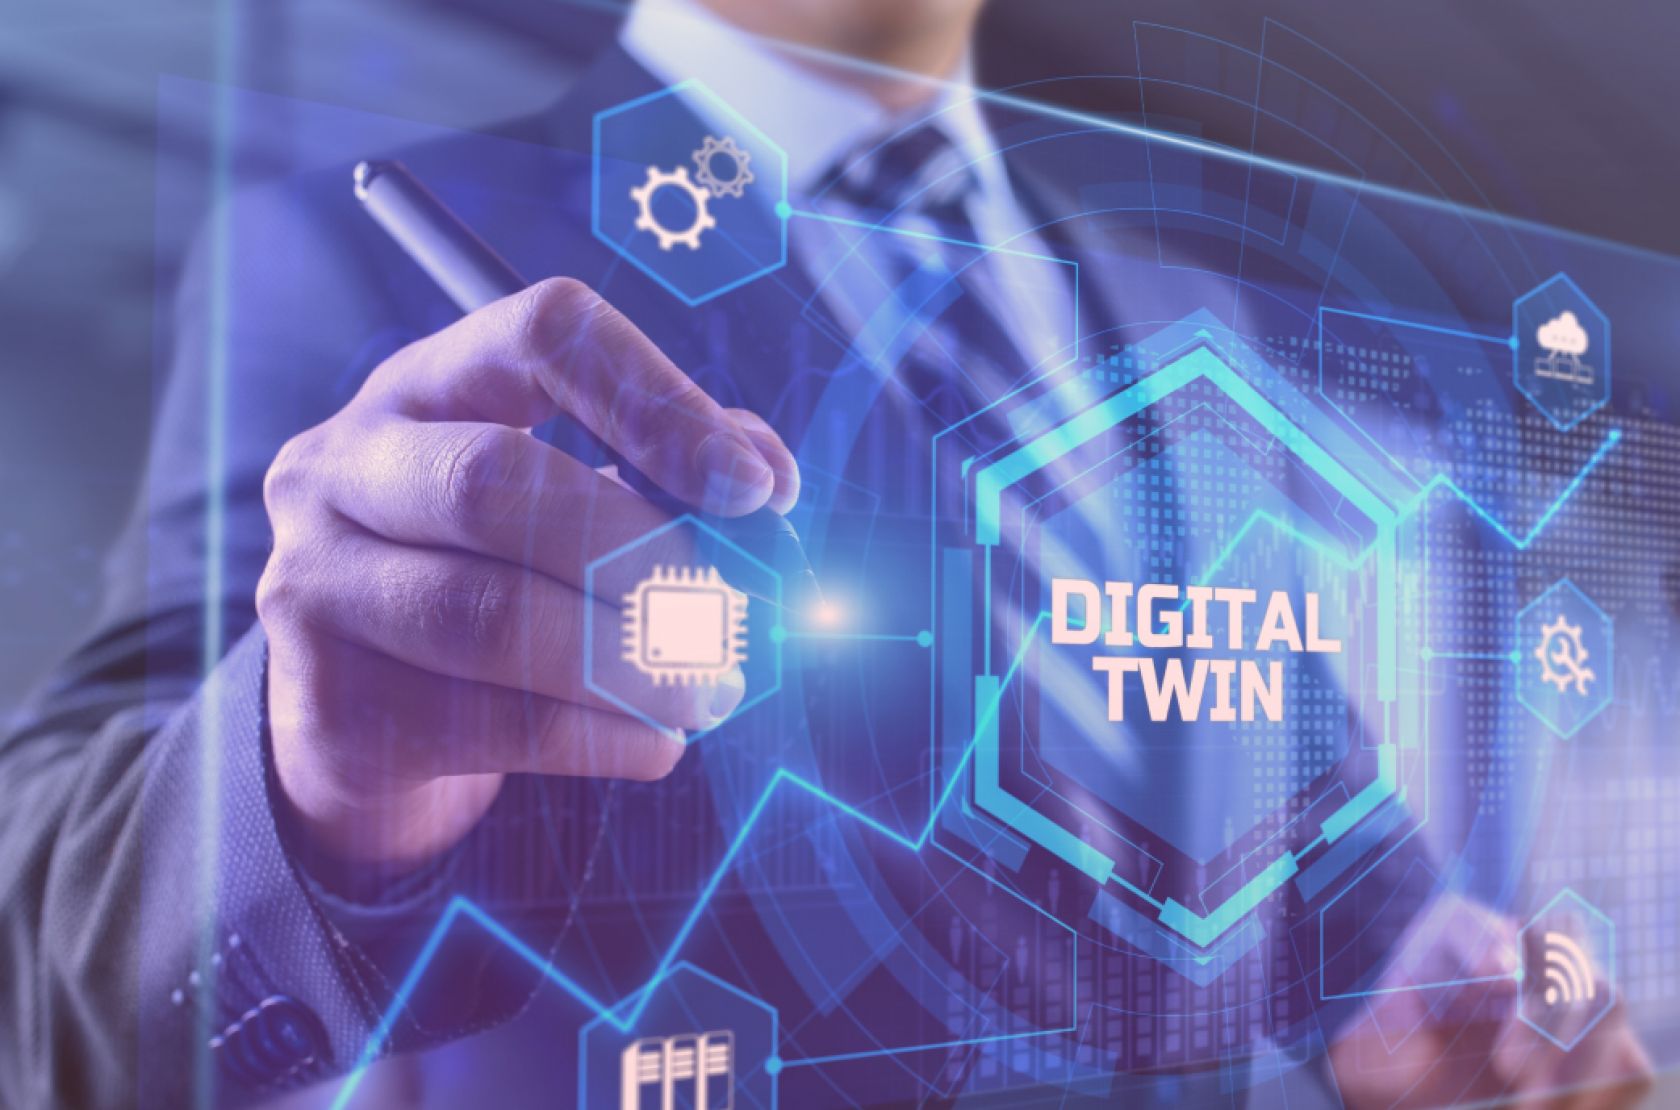 IoT and digital twins